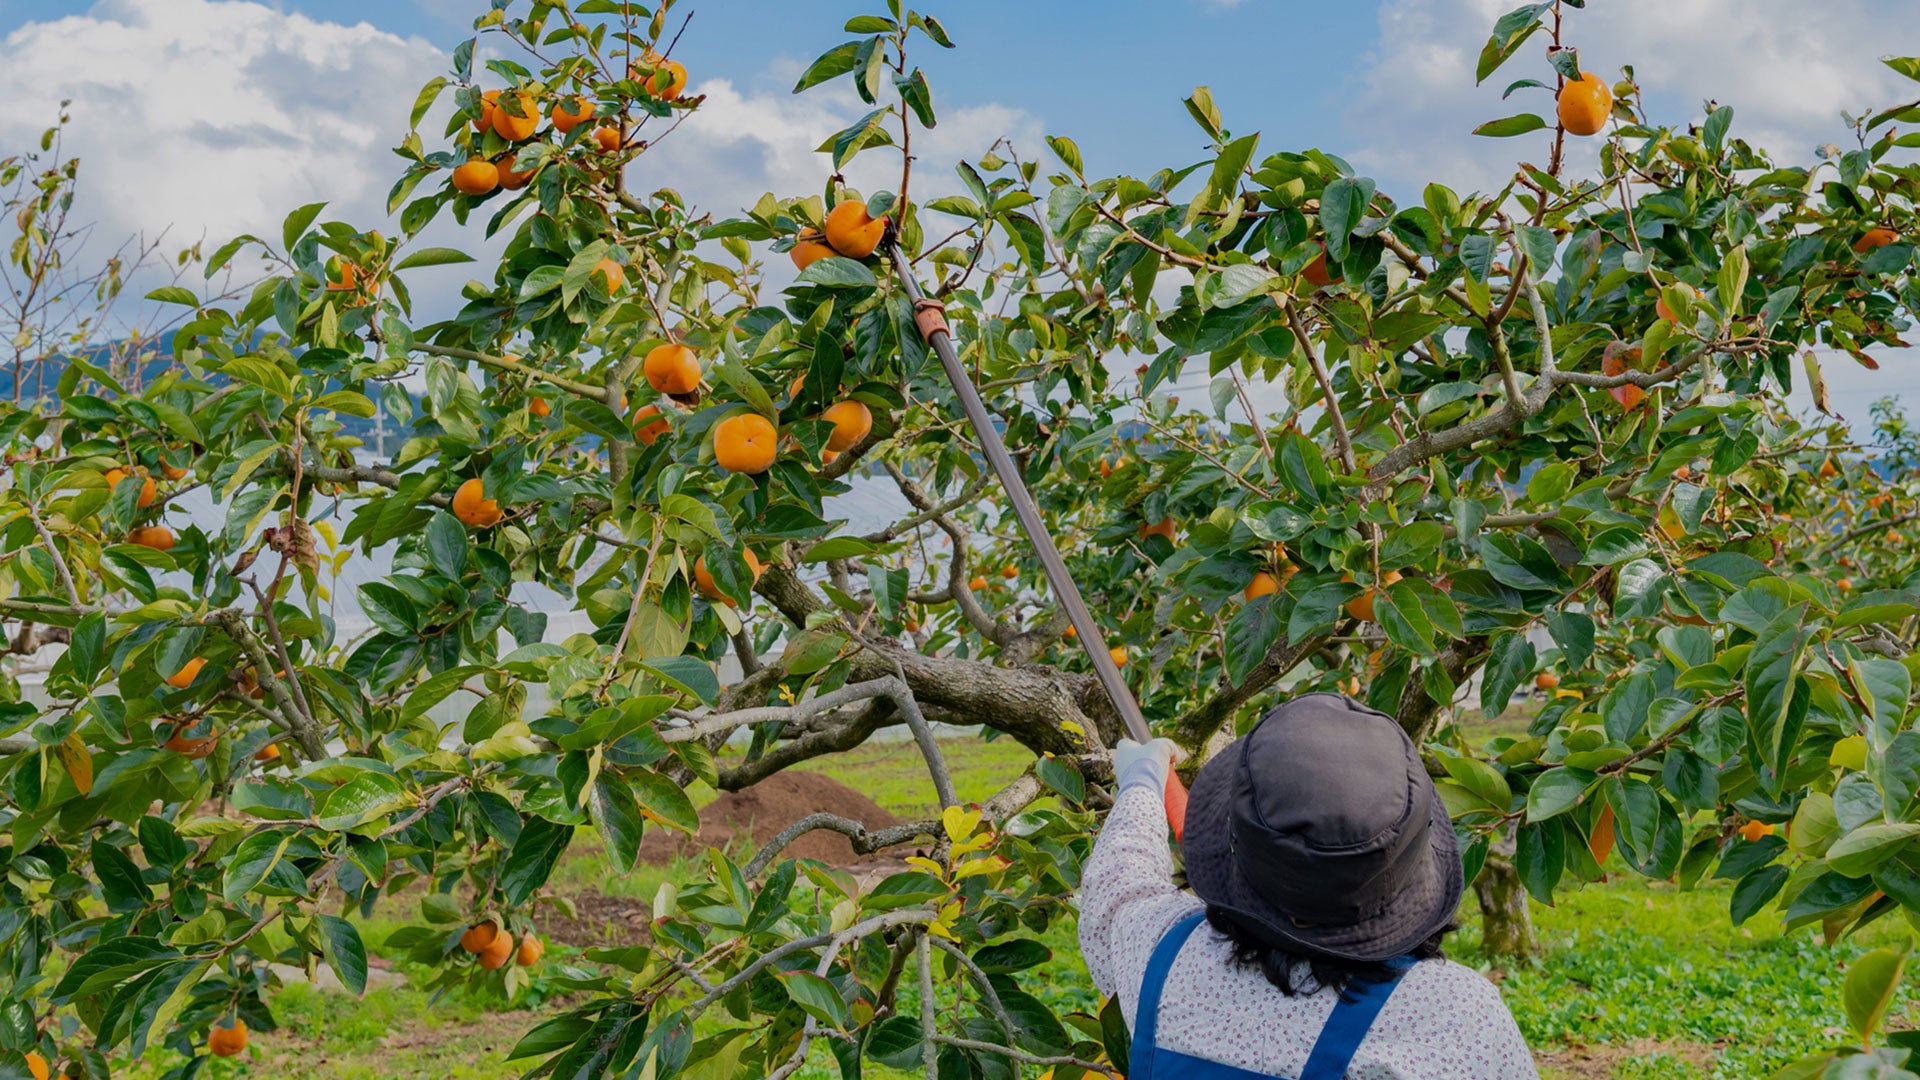 Japanese persimmons on a tree farmer working